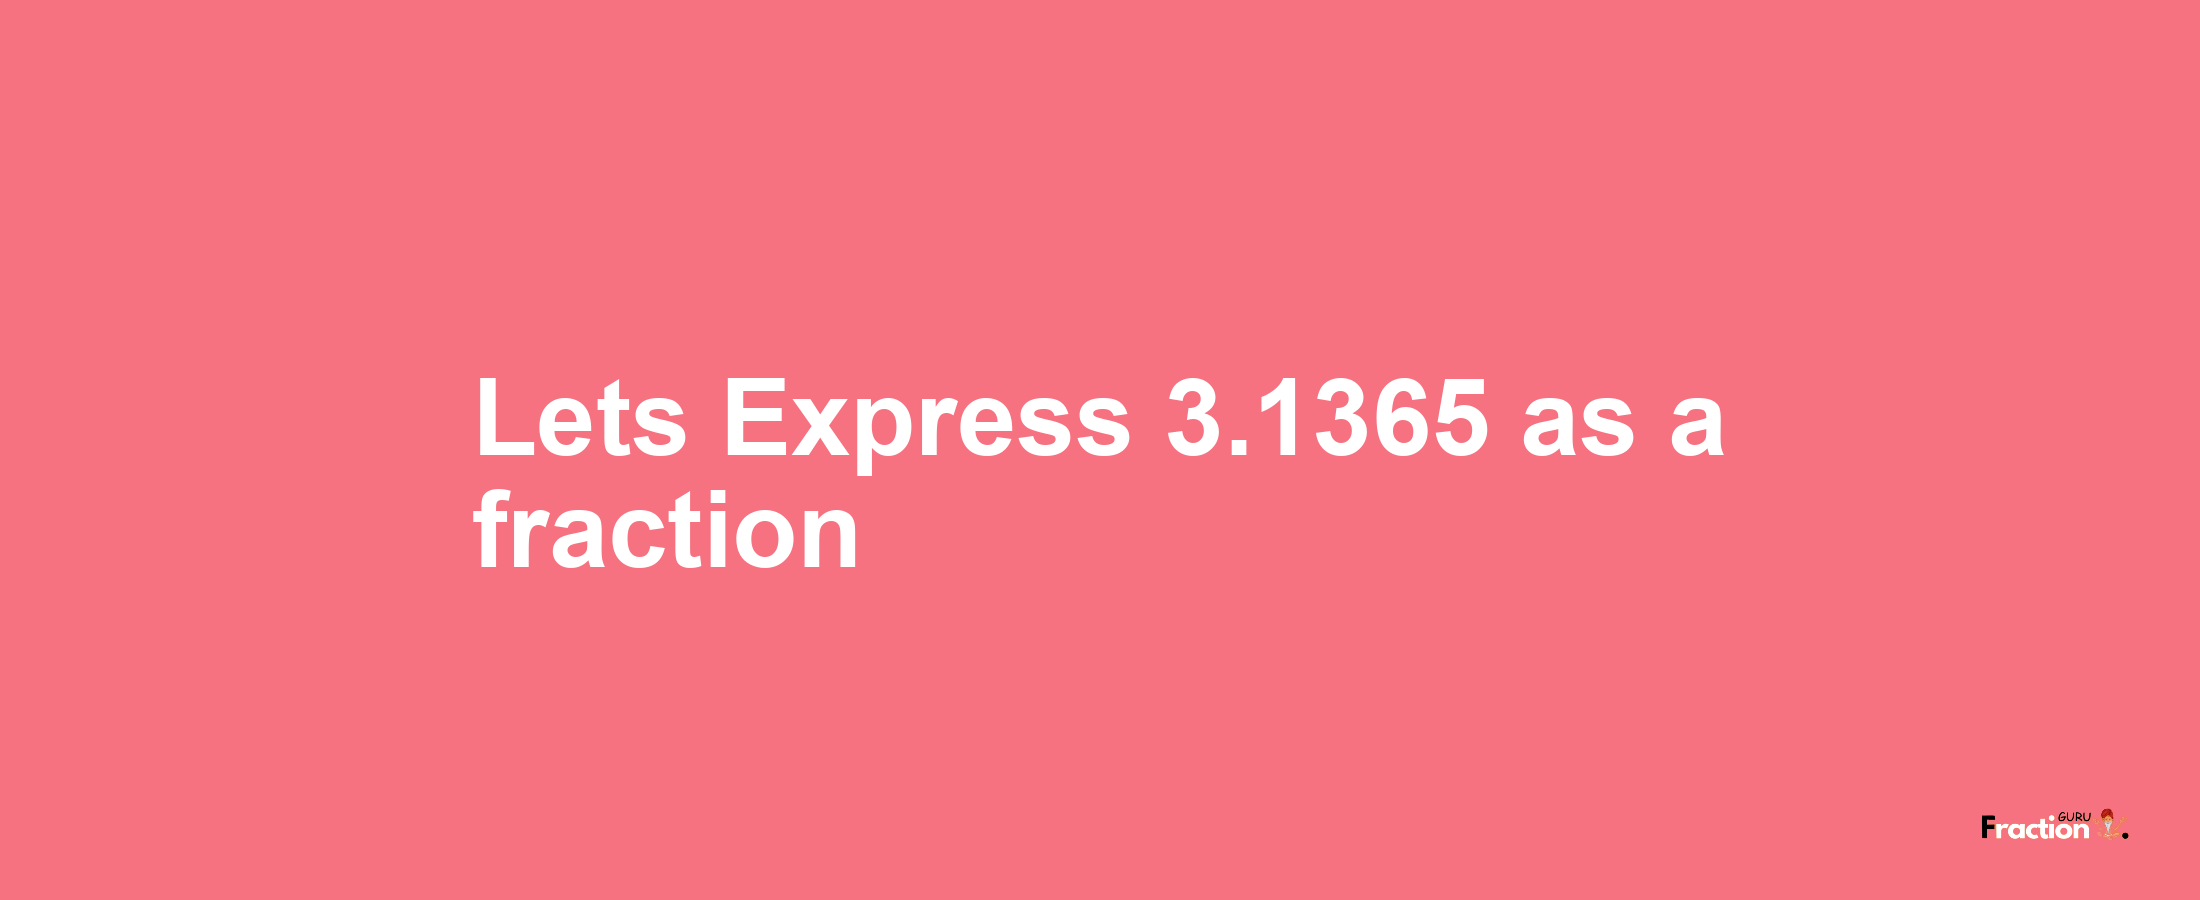 Lets Express 3.1365 as afraction